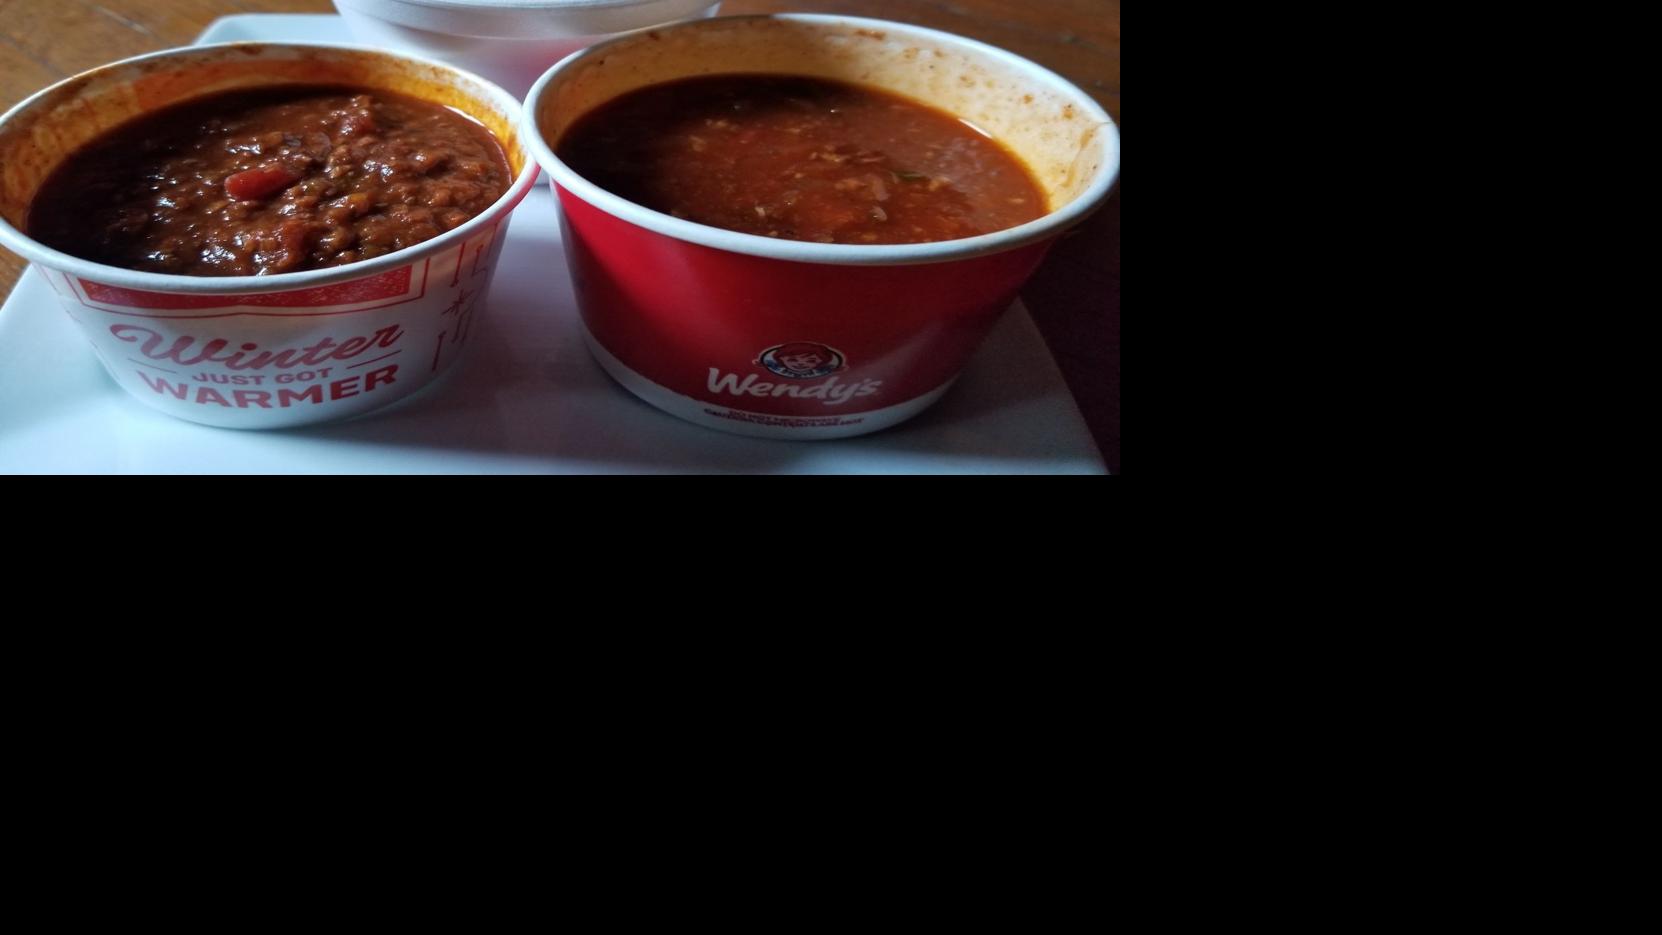 Who has Sioux City's best fast food chili? | Weekender ...